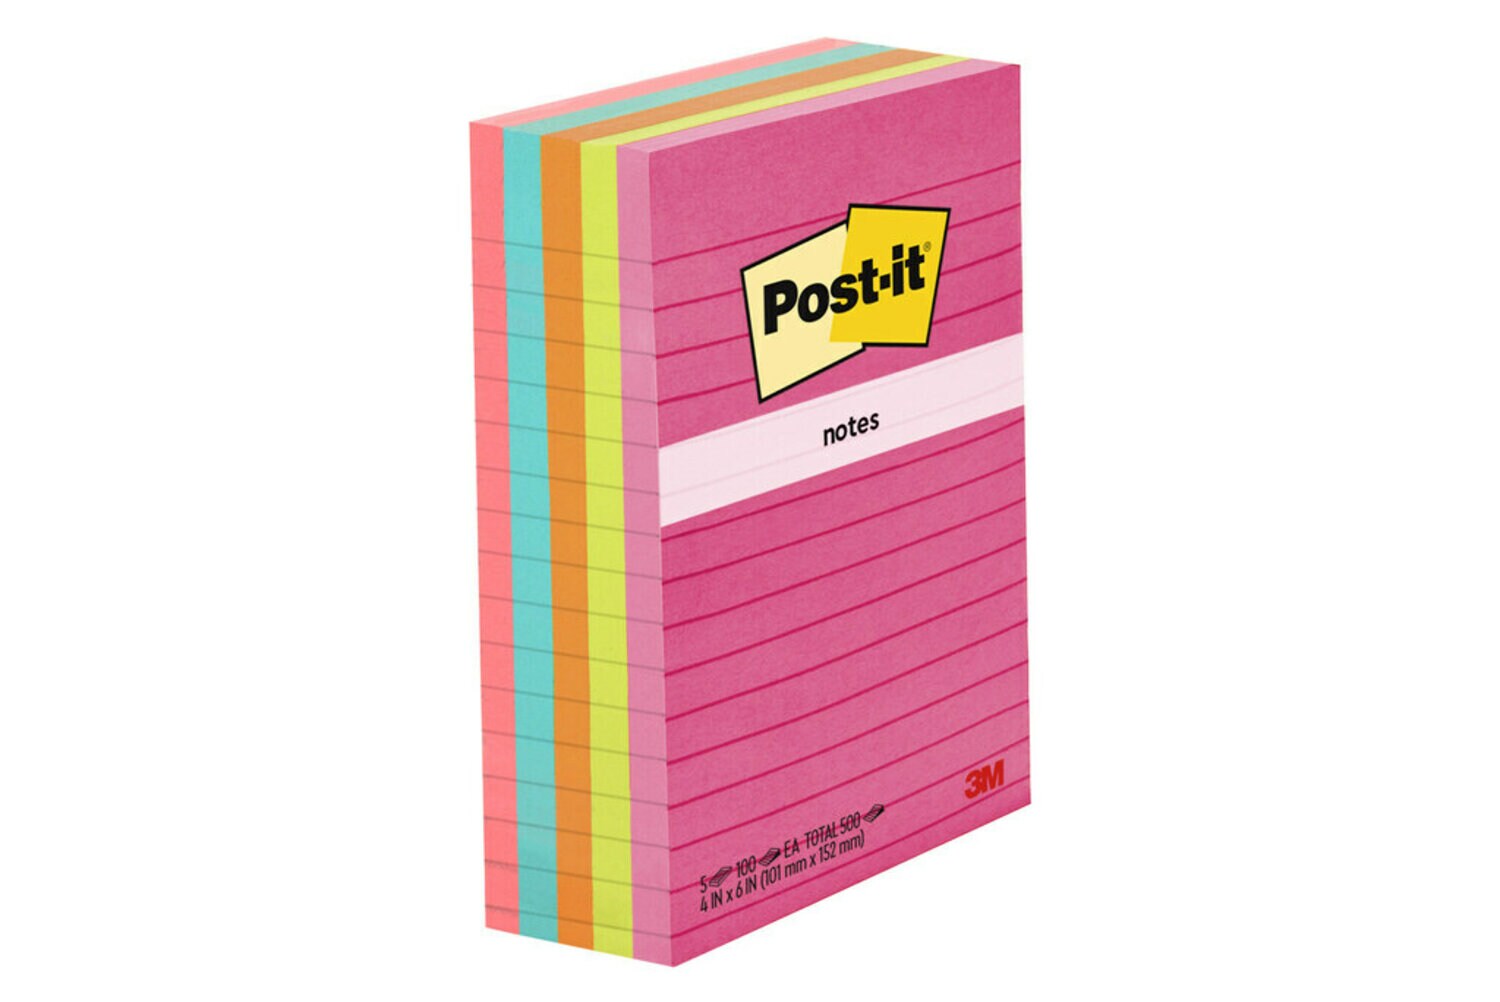 7100142989 - Post-it Notes, 660-5ANT, 4 in x 6 in (101 mm x 152 mm)